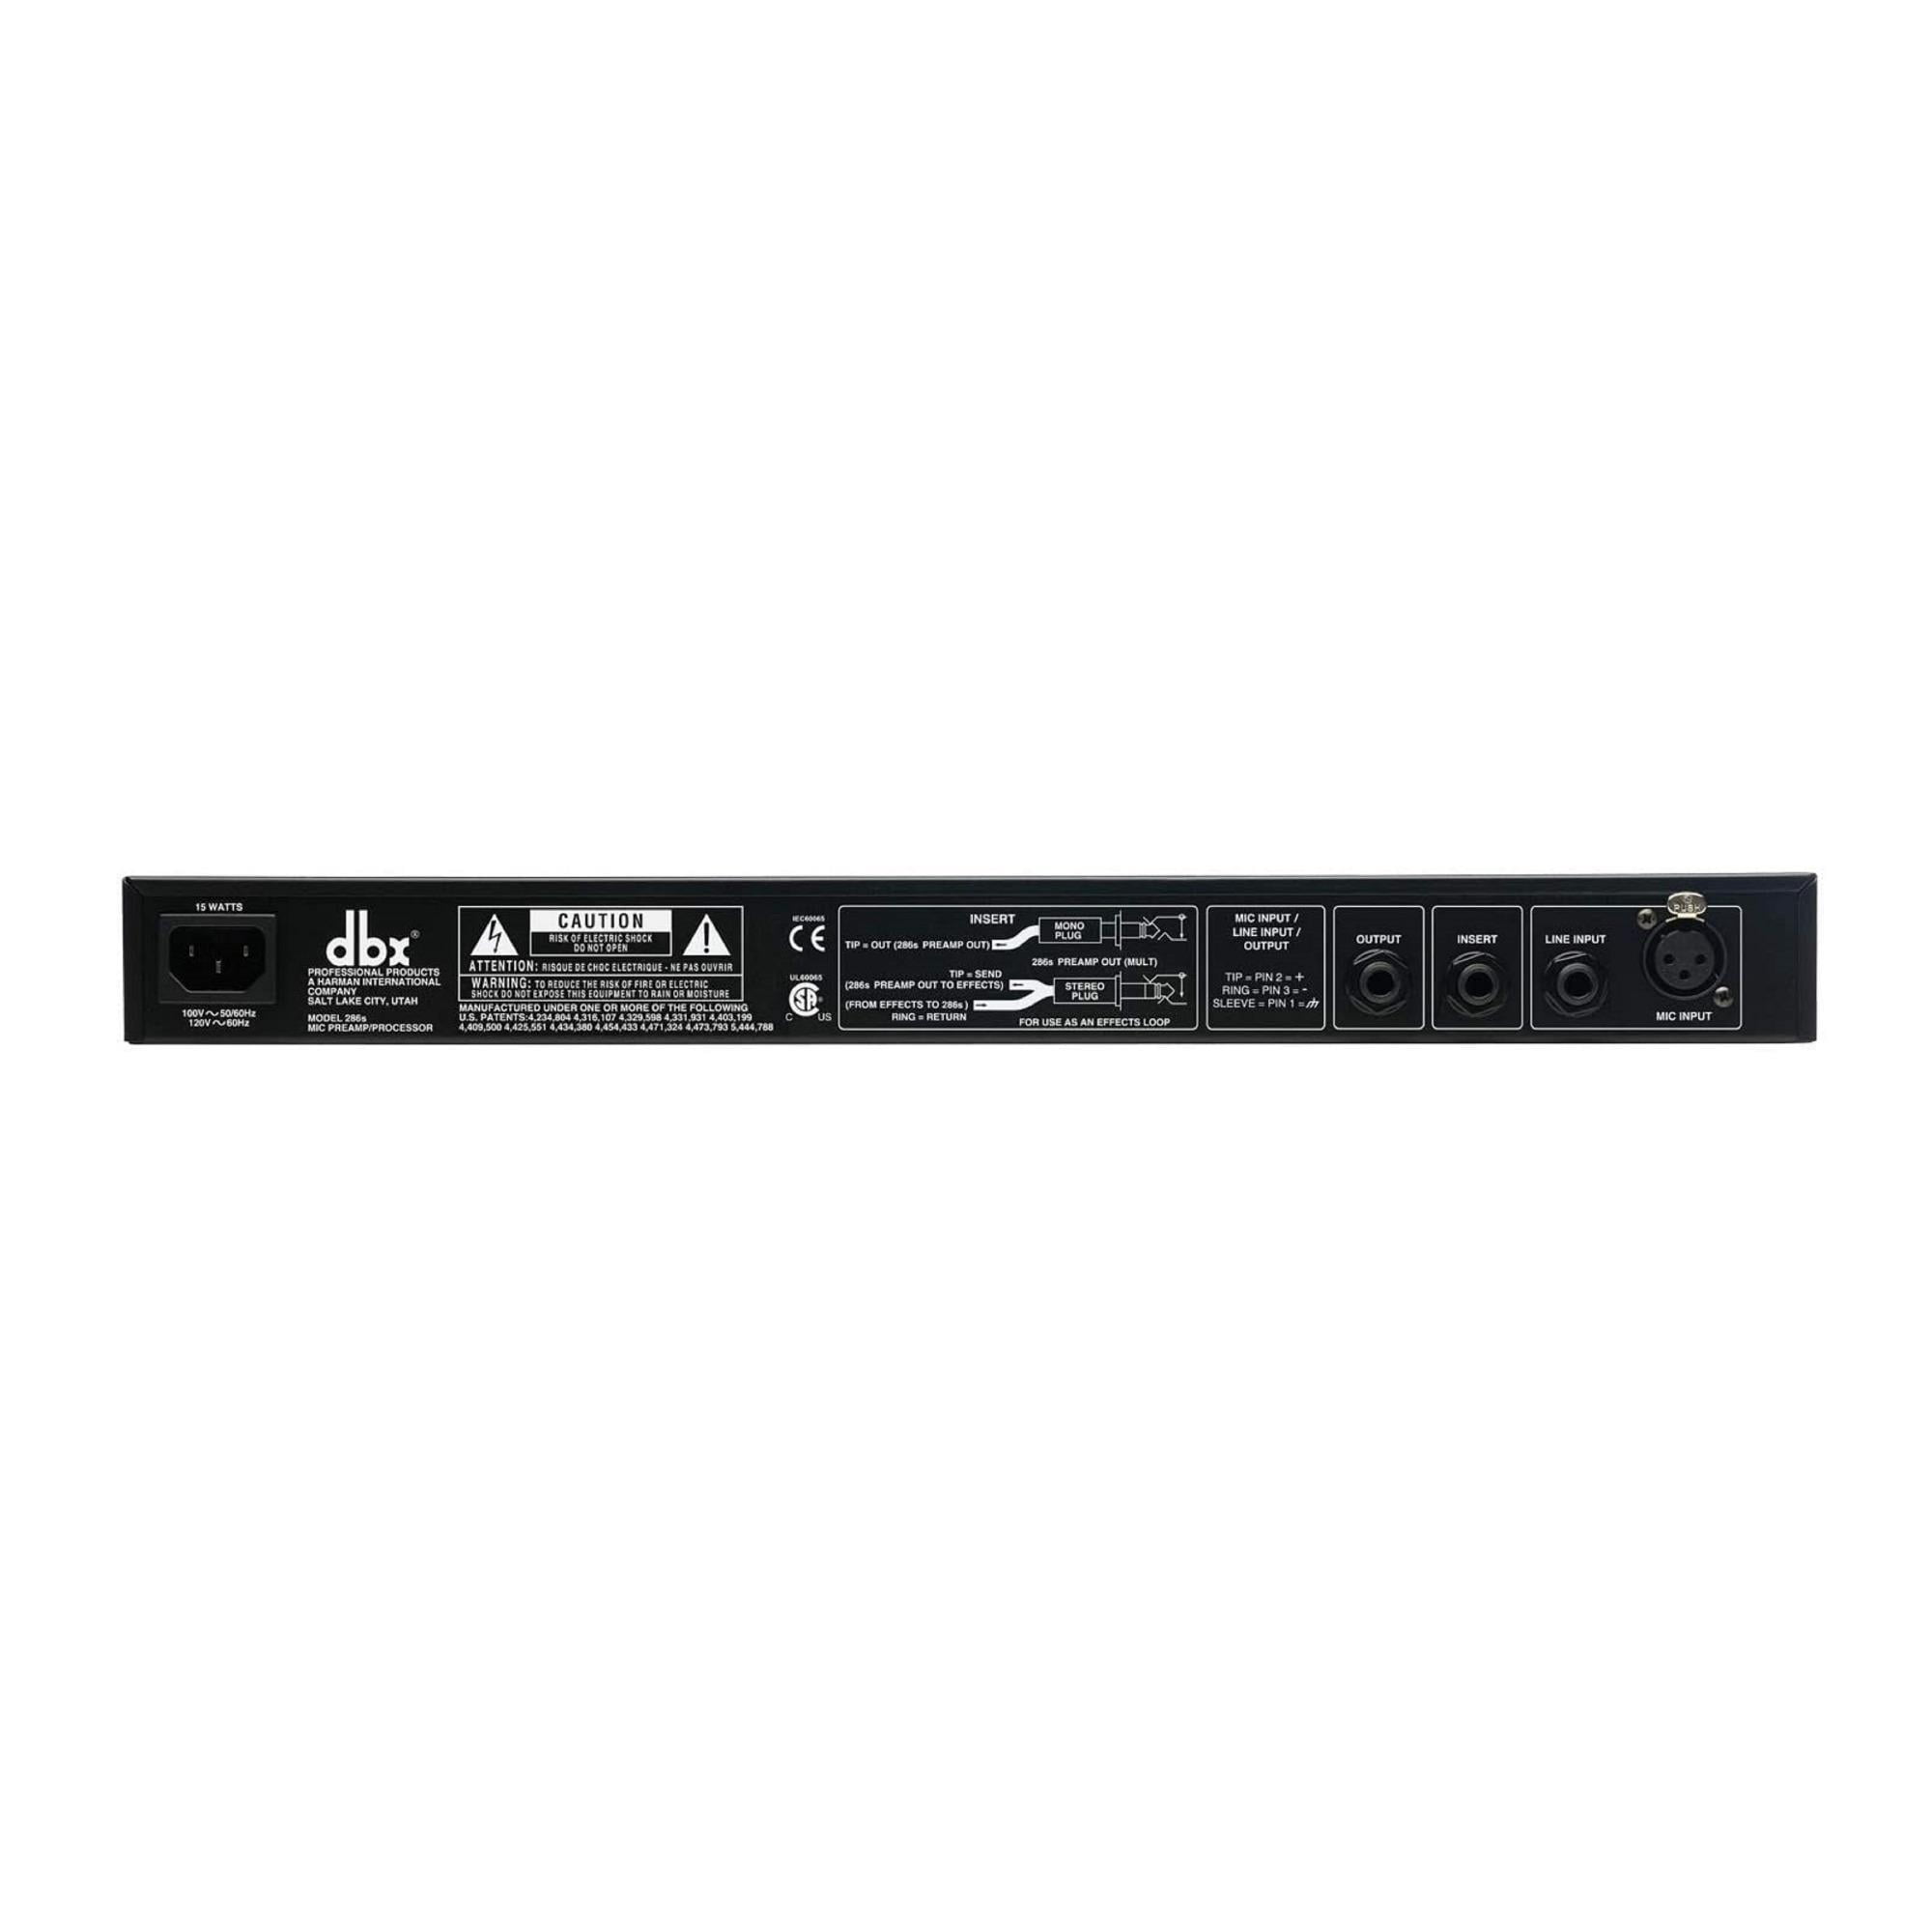 DBX 286s Microphone Preamp And Channel Strip Processor with TRS 